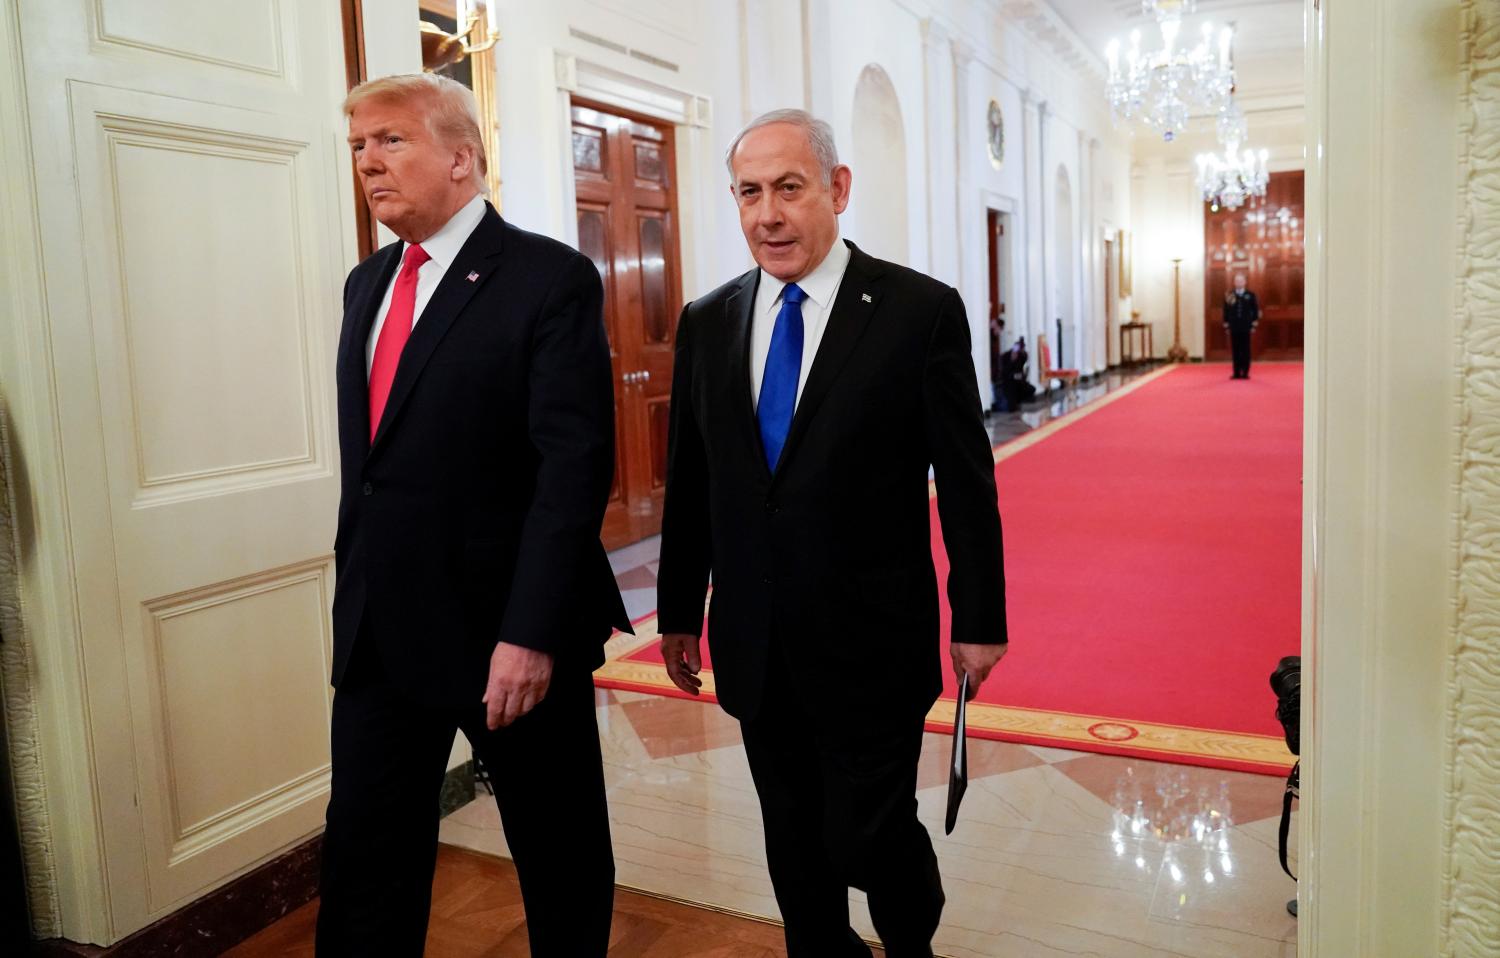 U.S. President Donald Trump and Israel's Prime Minister Benjamin Netanyahu arrive at a joint news conference to discuss a new Middle East peace plan proposal in the East Room of the White House in Washington, U.S., January 28, 2020. REUTERS/Joshua Roberts